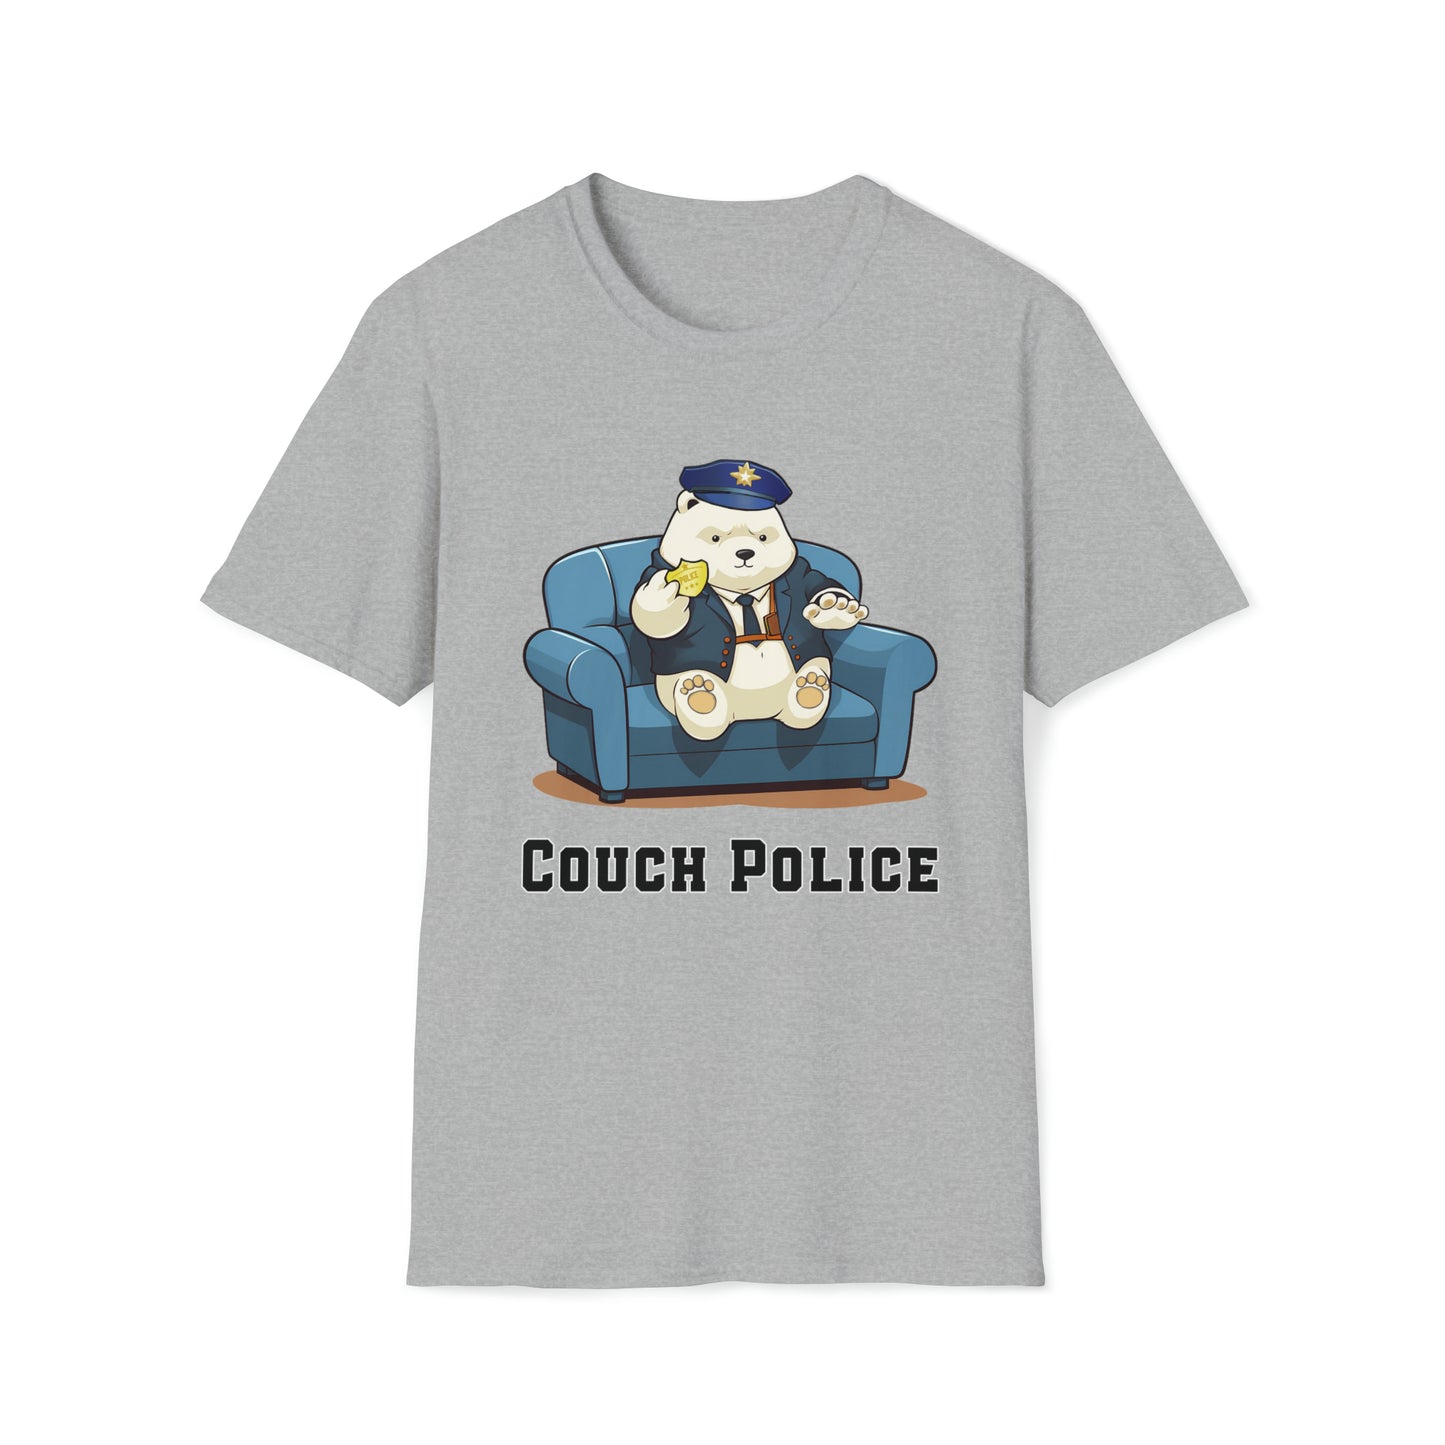 Funny Shirt - Couch Police - Unisex - Softstyle T-Shirt